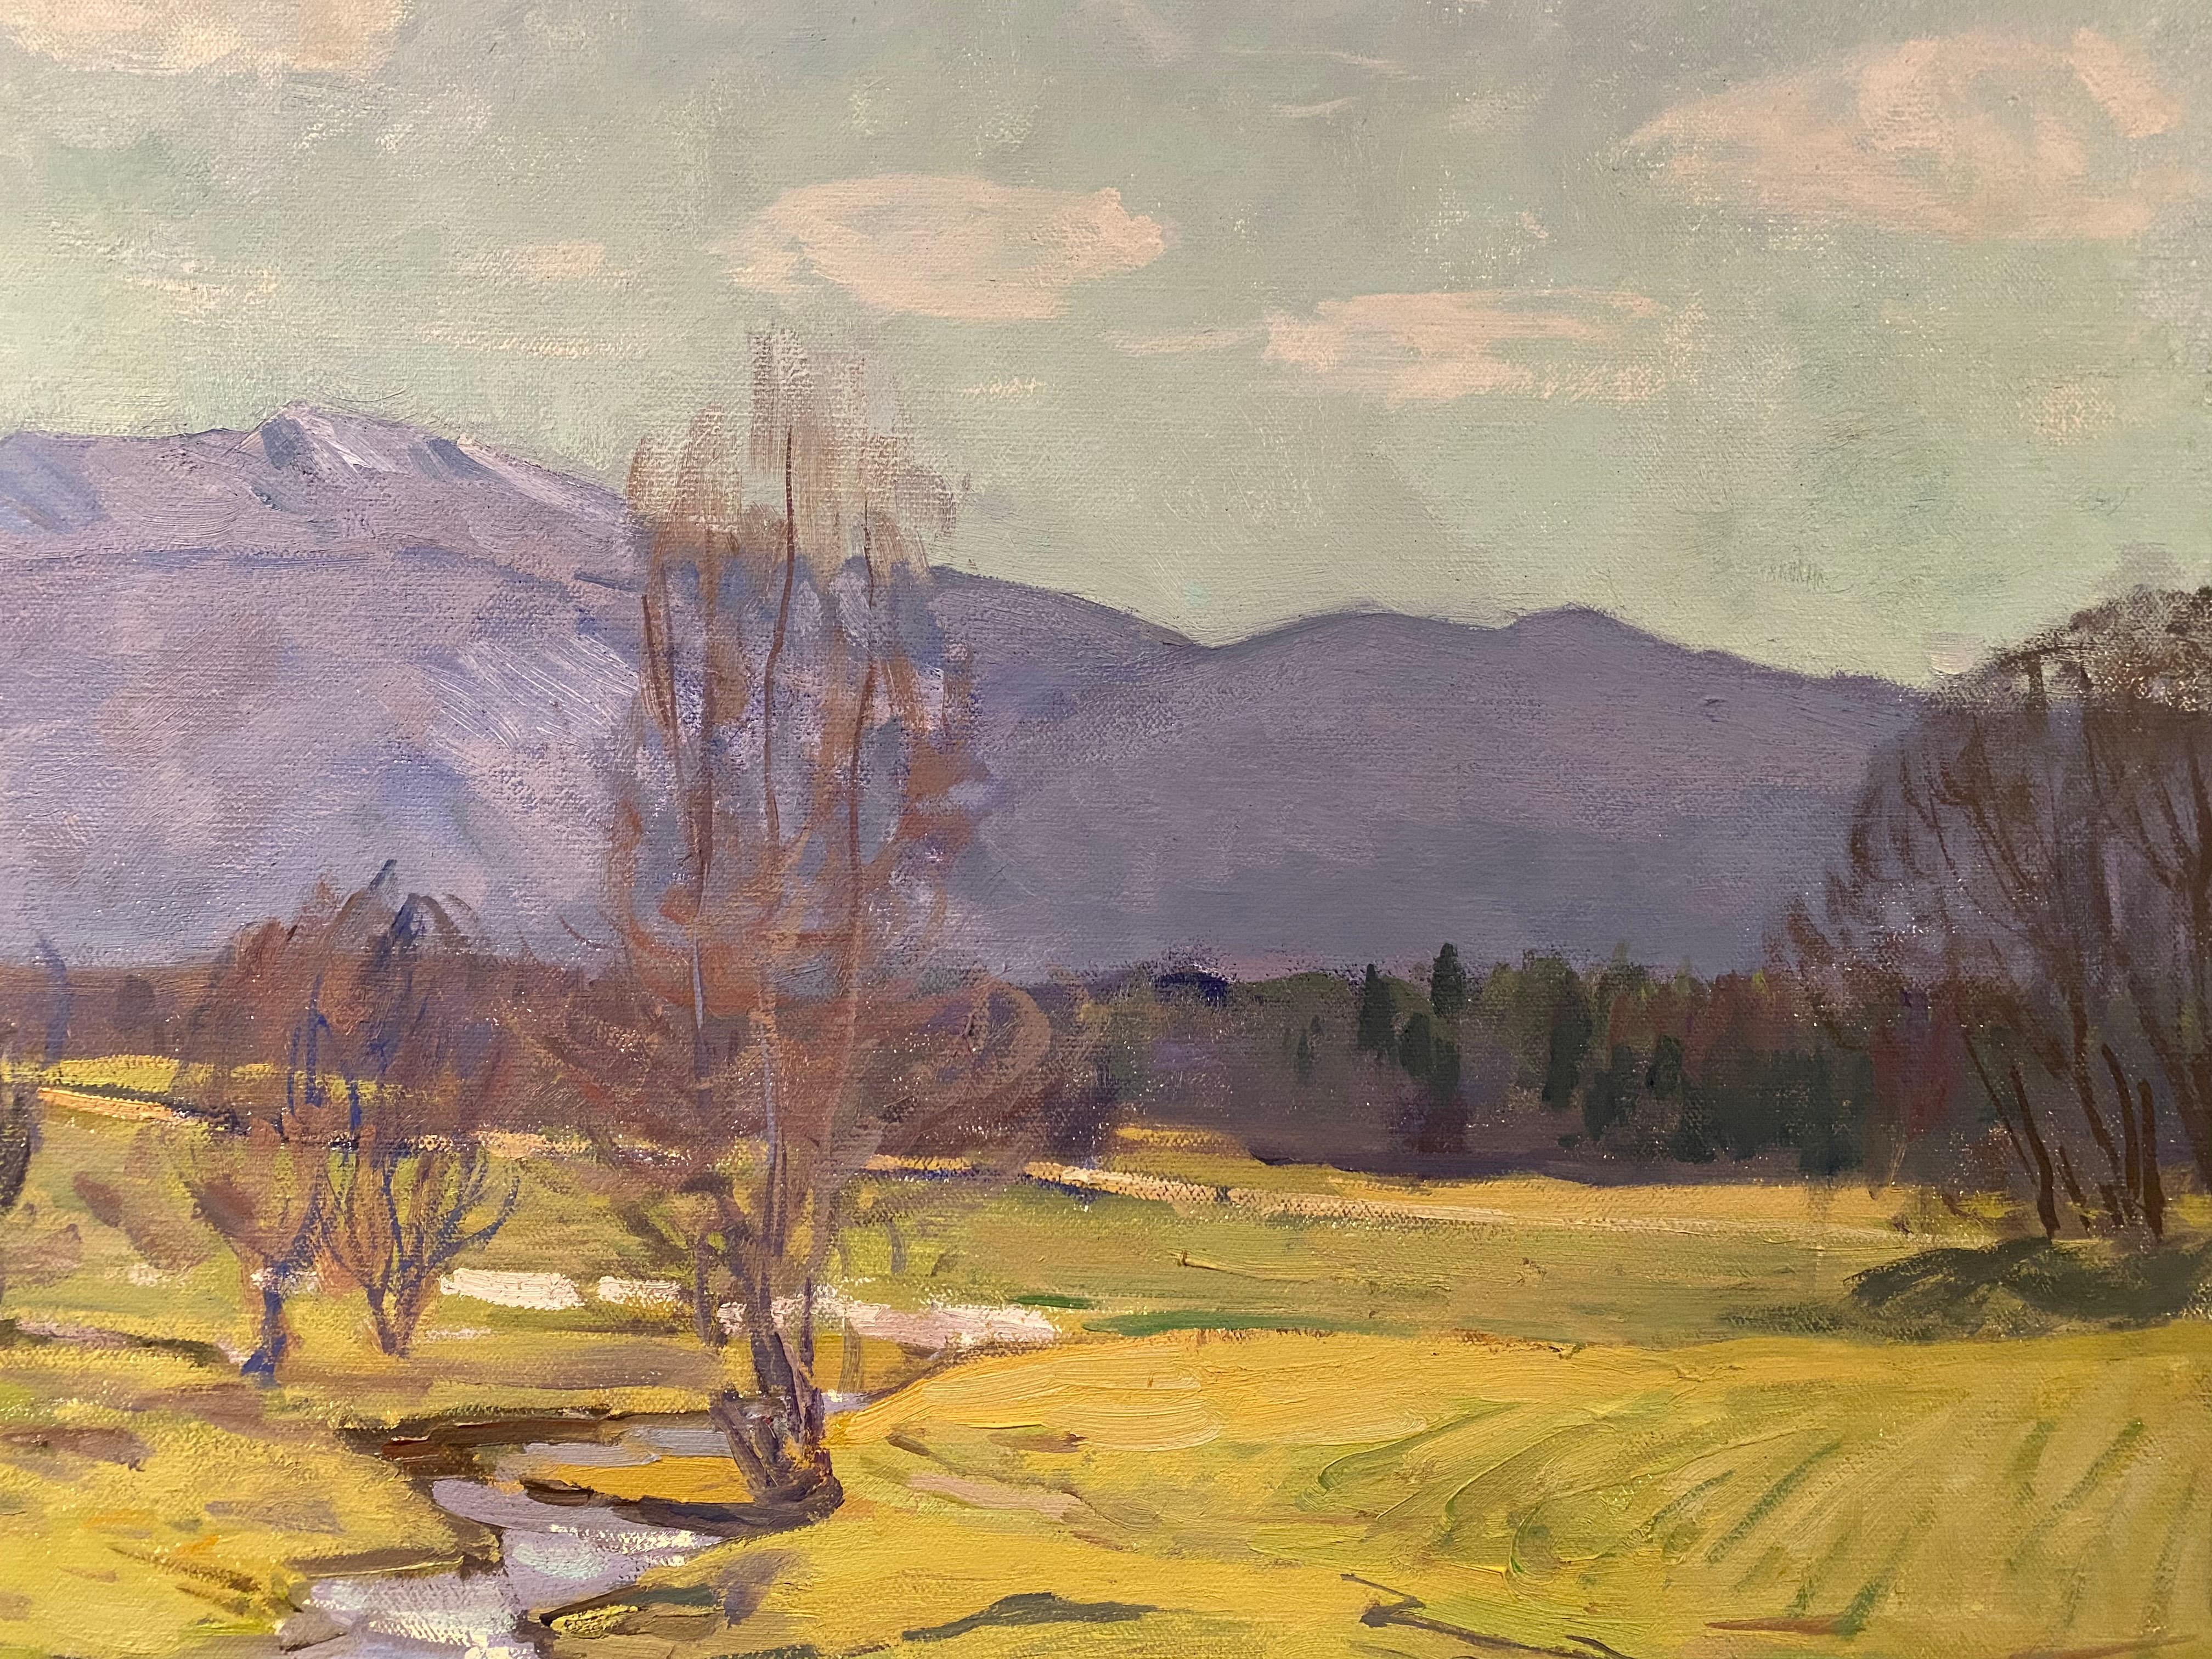 Framed dimensions: 48 x 48 inches

Painted en plein air, in Jeffersonville, Vermont. A bright, early spring, landscape. The foreground encapsulates the wide mouth of the shallow creek that winds toward the distant horizon. A few barns reside within